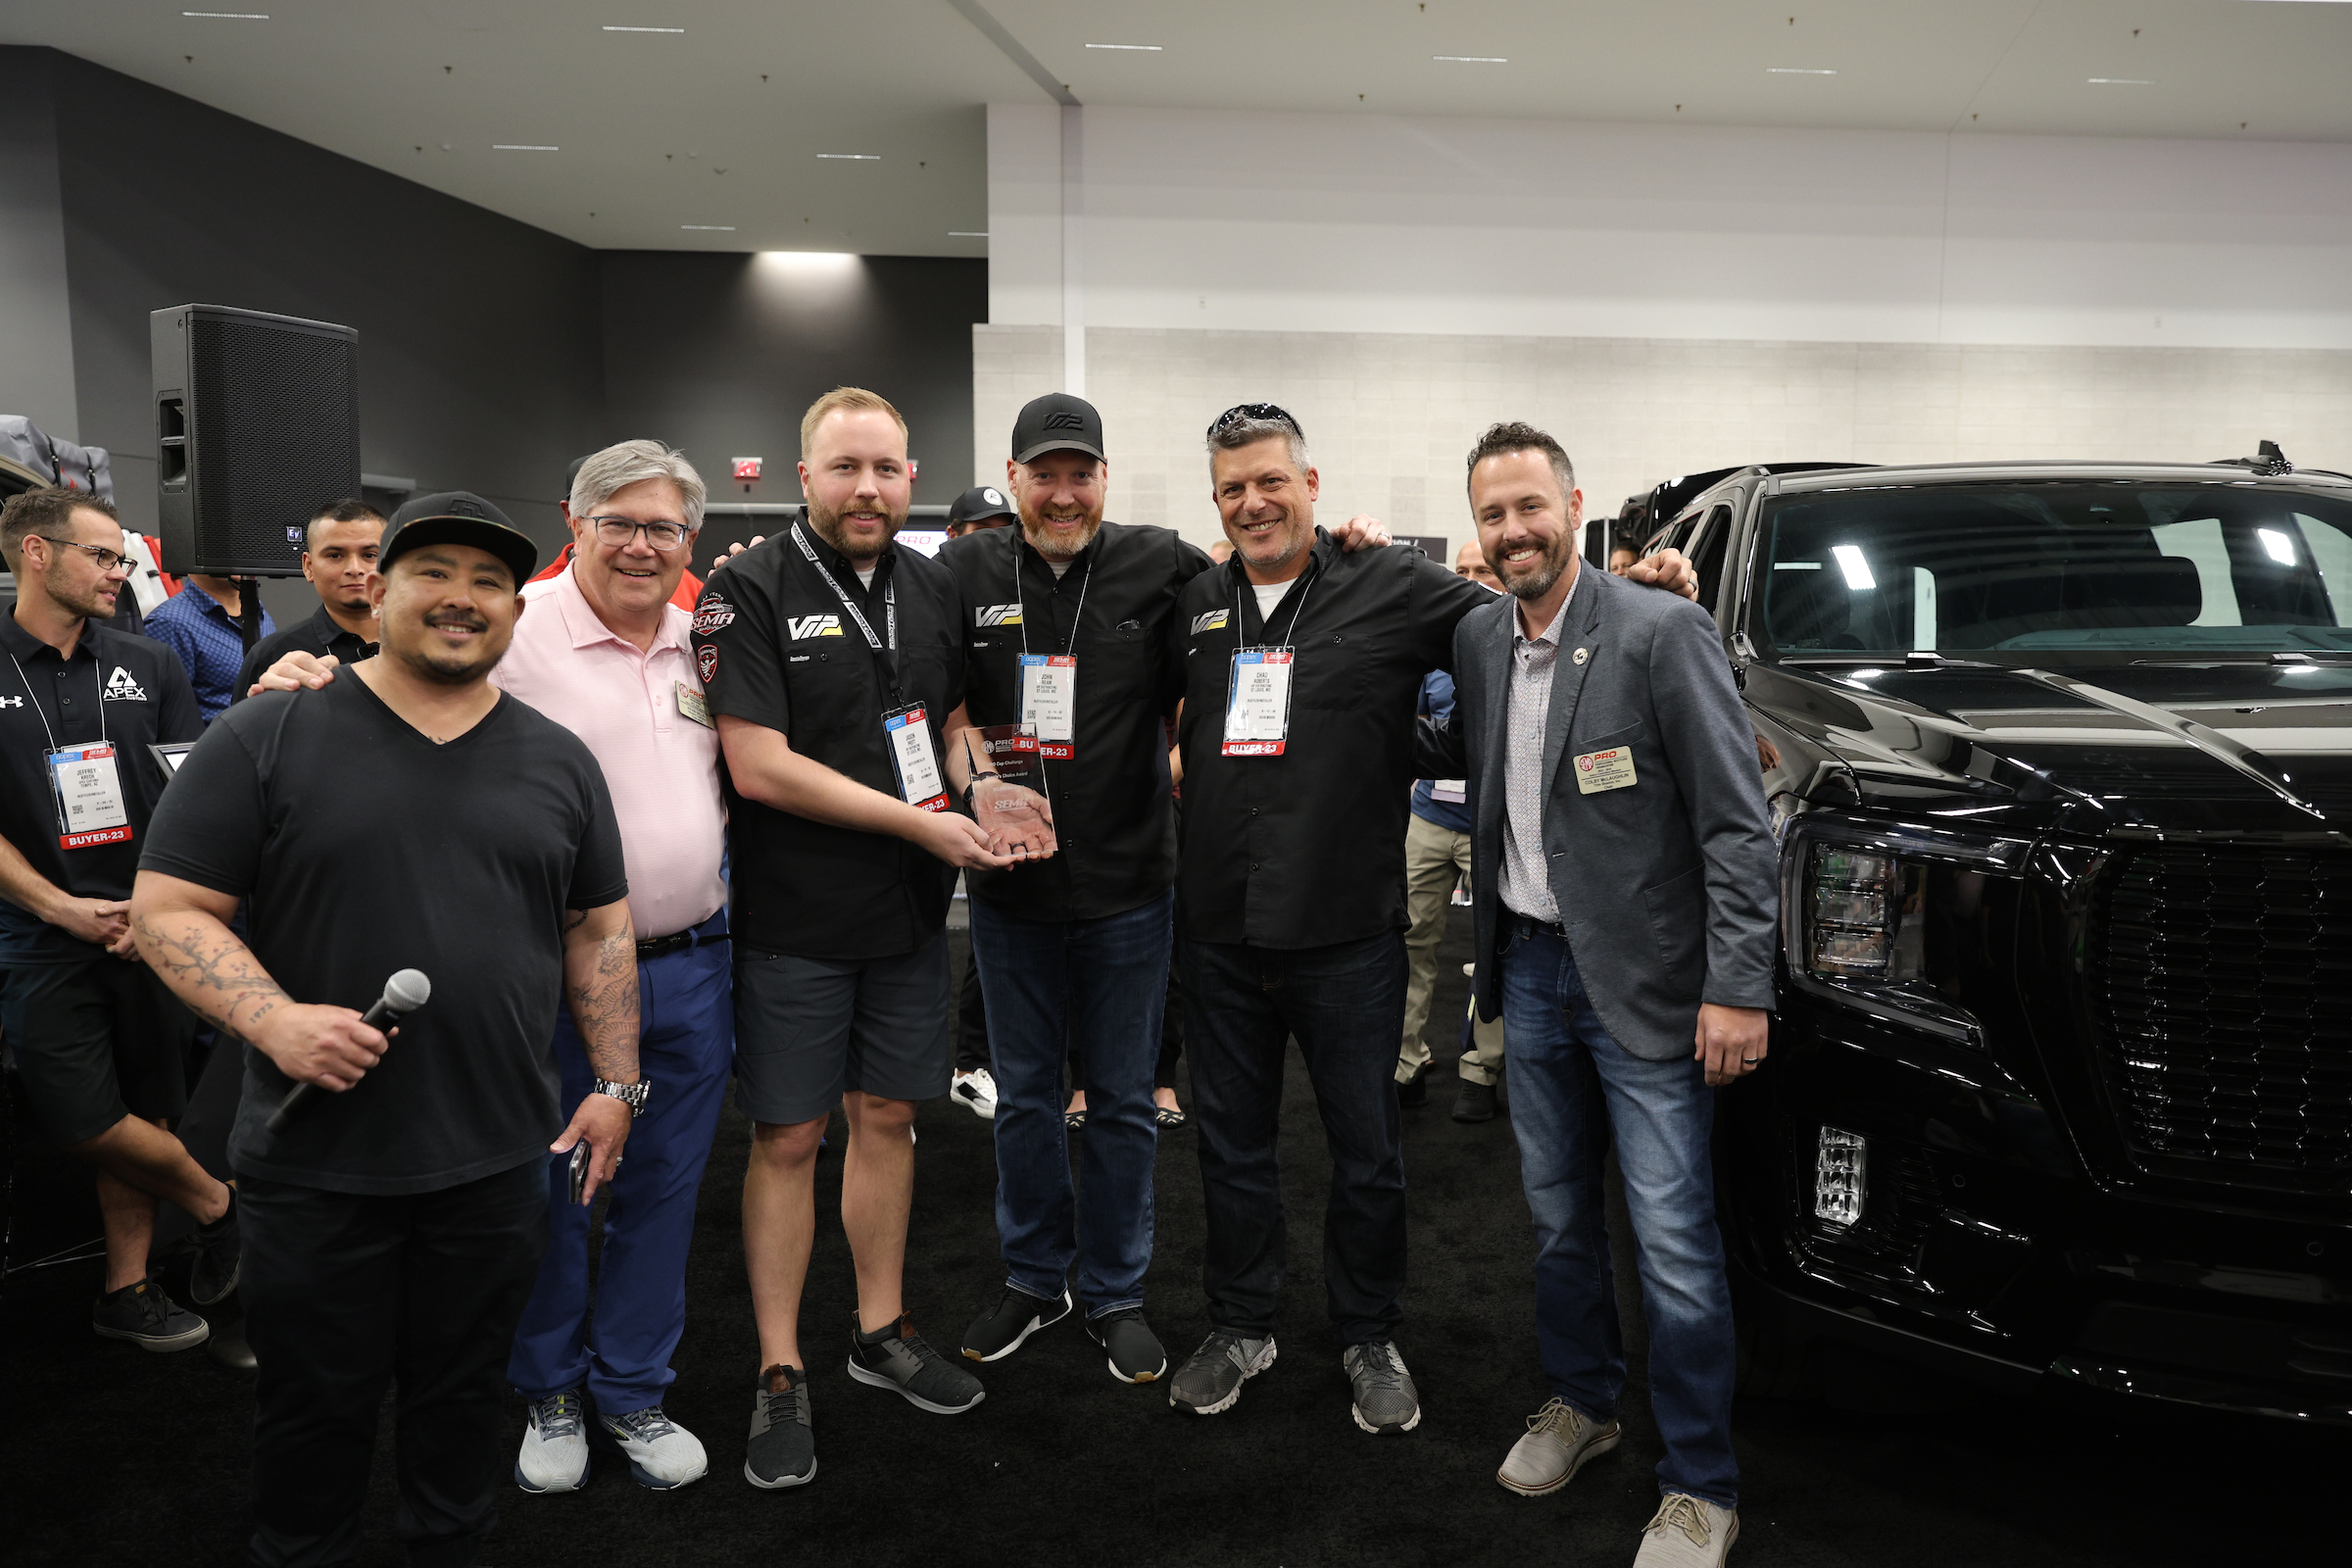 VIP Distributing Company poses with the 2023 PRO Cup Challenge People’s Choice Award next to their GMC Yukon Denali